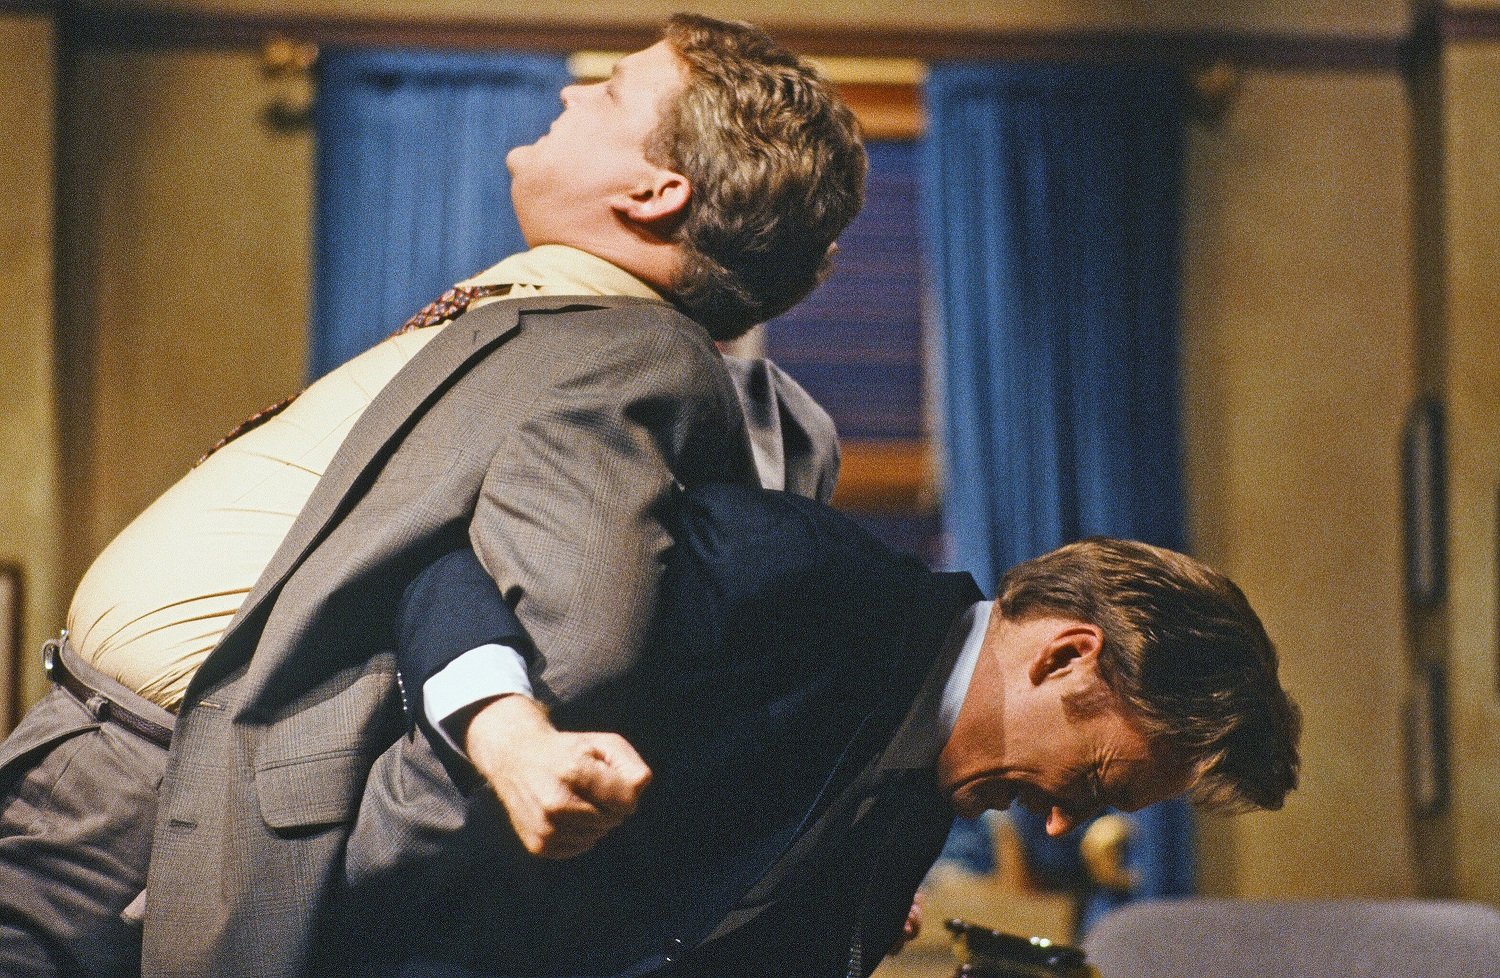 Andy Richter and Conan O'Brien on September 30, 1993